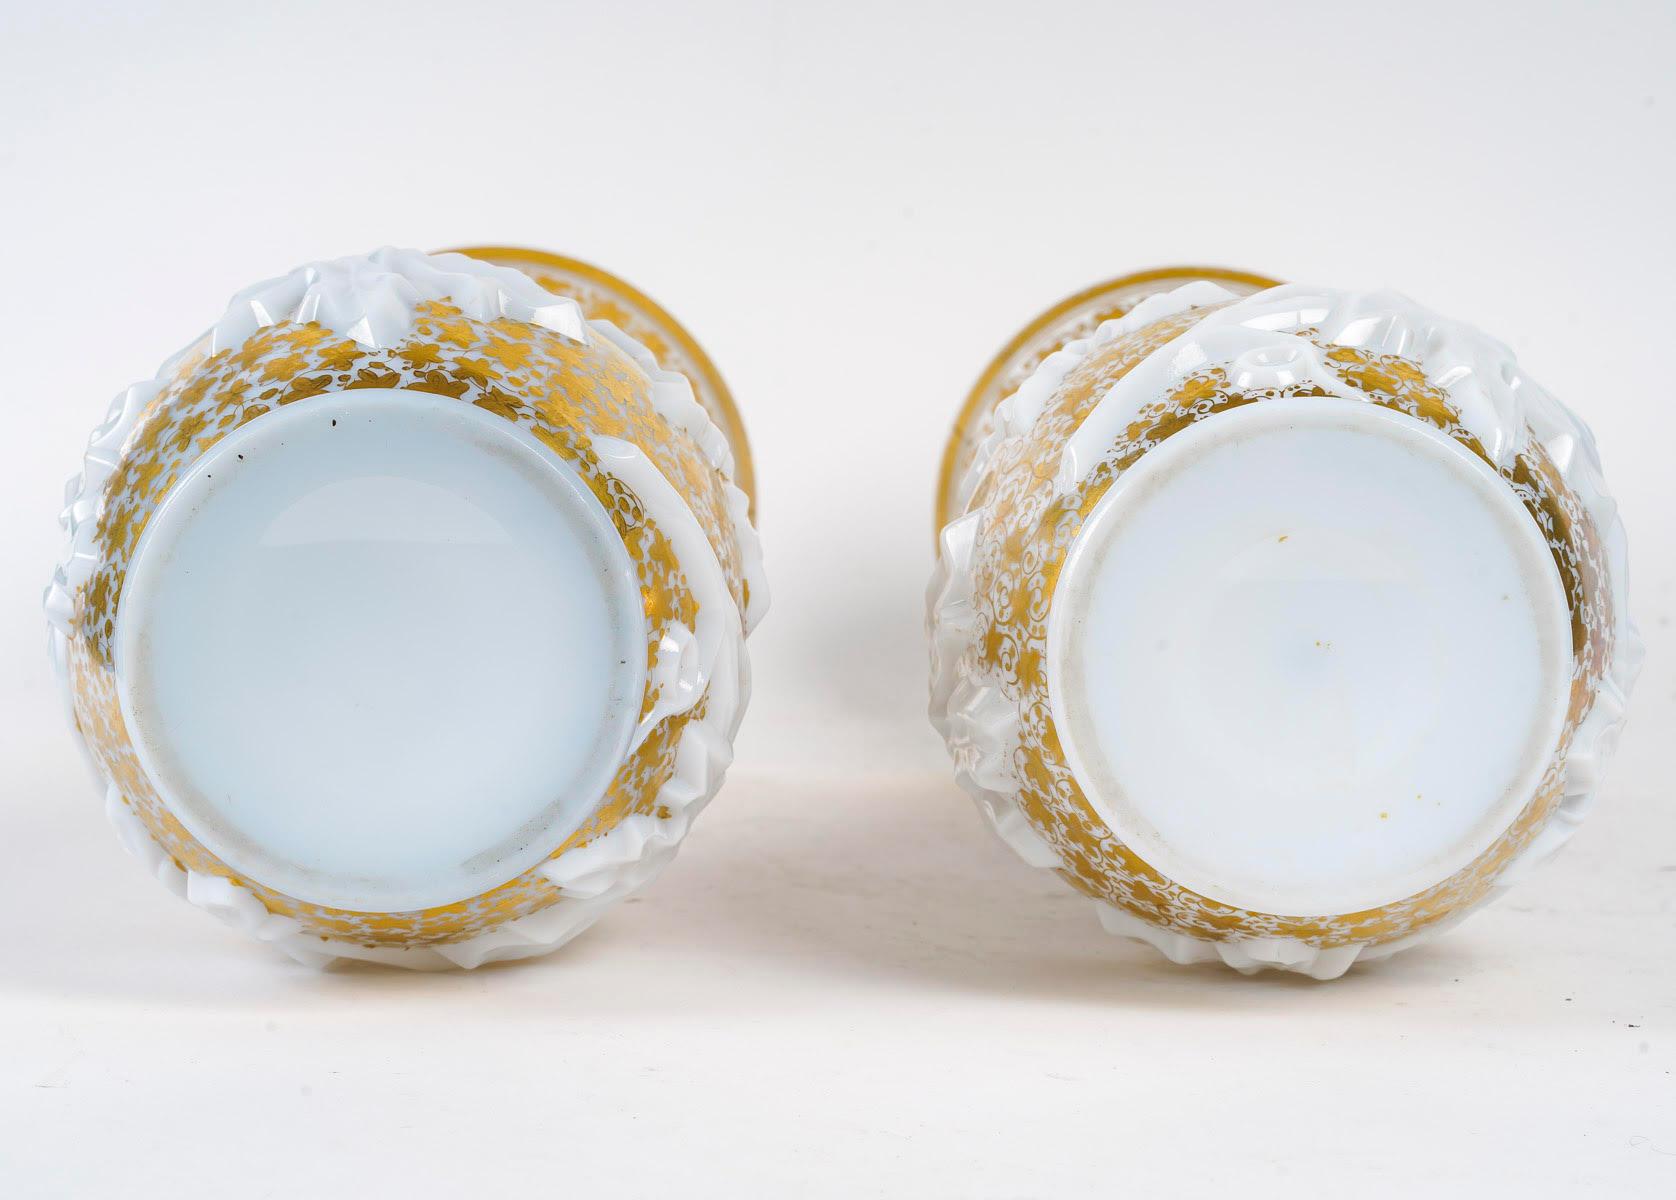 Pair of Opaline Vases Enhanced with Gold, 19th Century, Napoleon III Period. For Sale 2